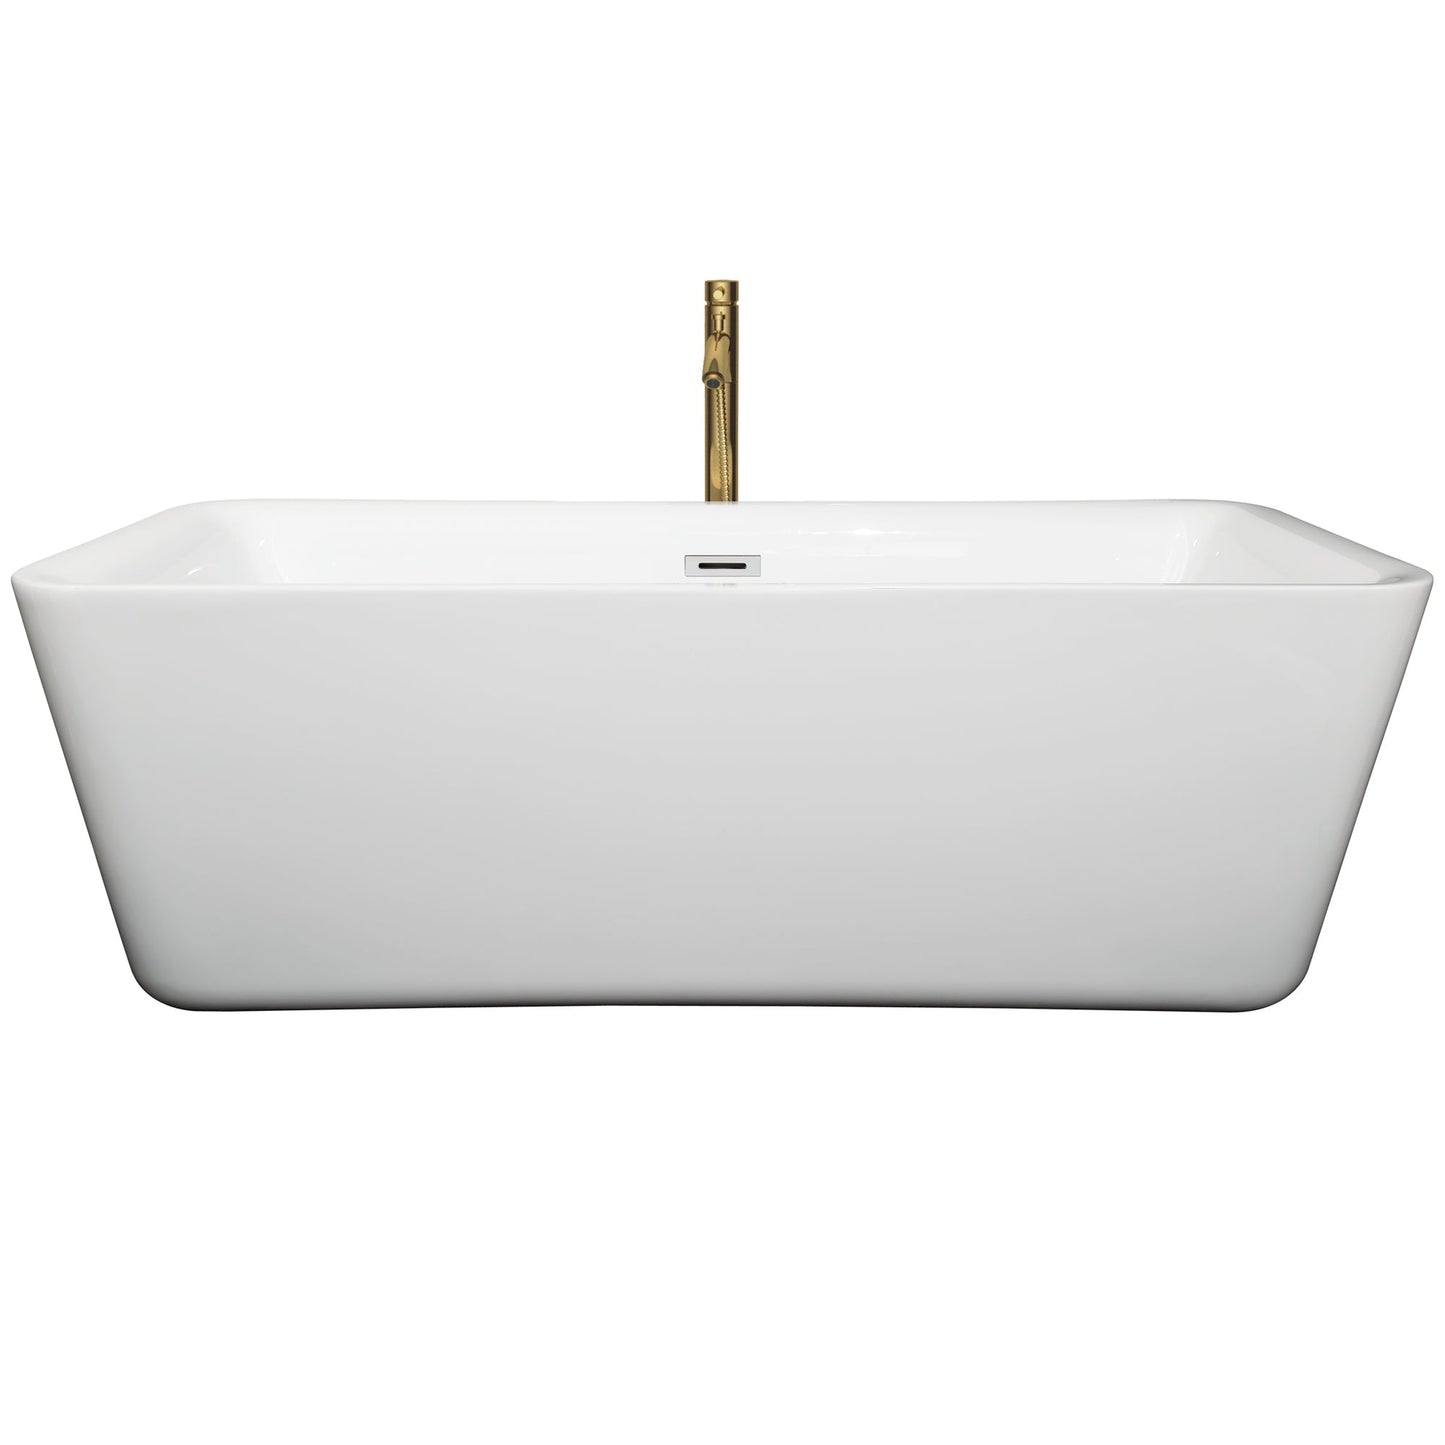 Wyndham Collection Emily 69" Freestanding Bathtub in White With Polished Chrome Trim and Floor Mounted Faucet in Brushed Gold